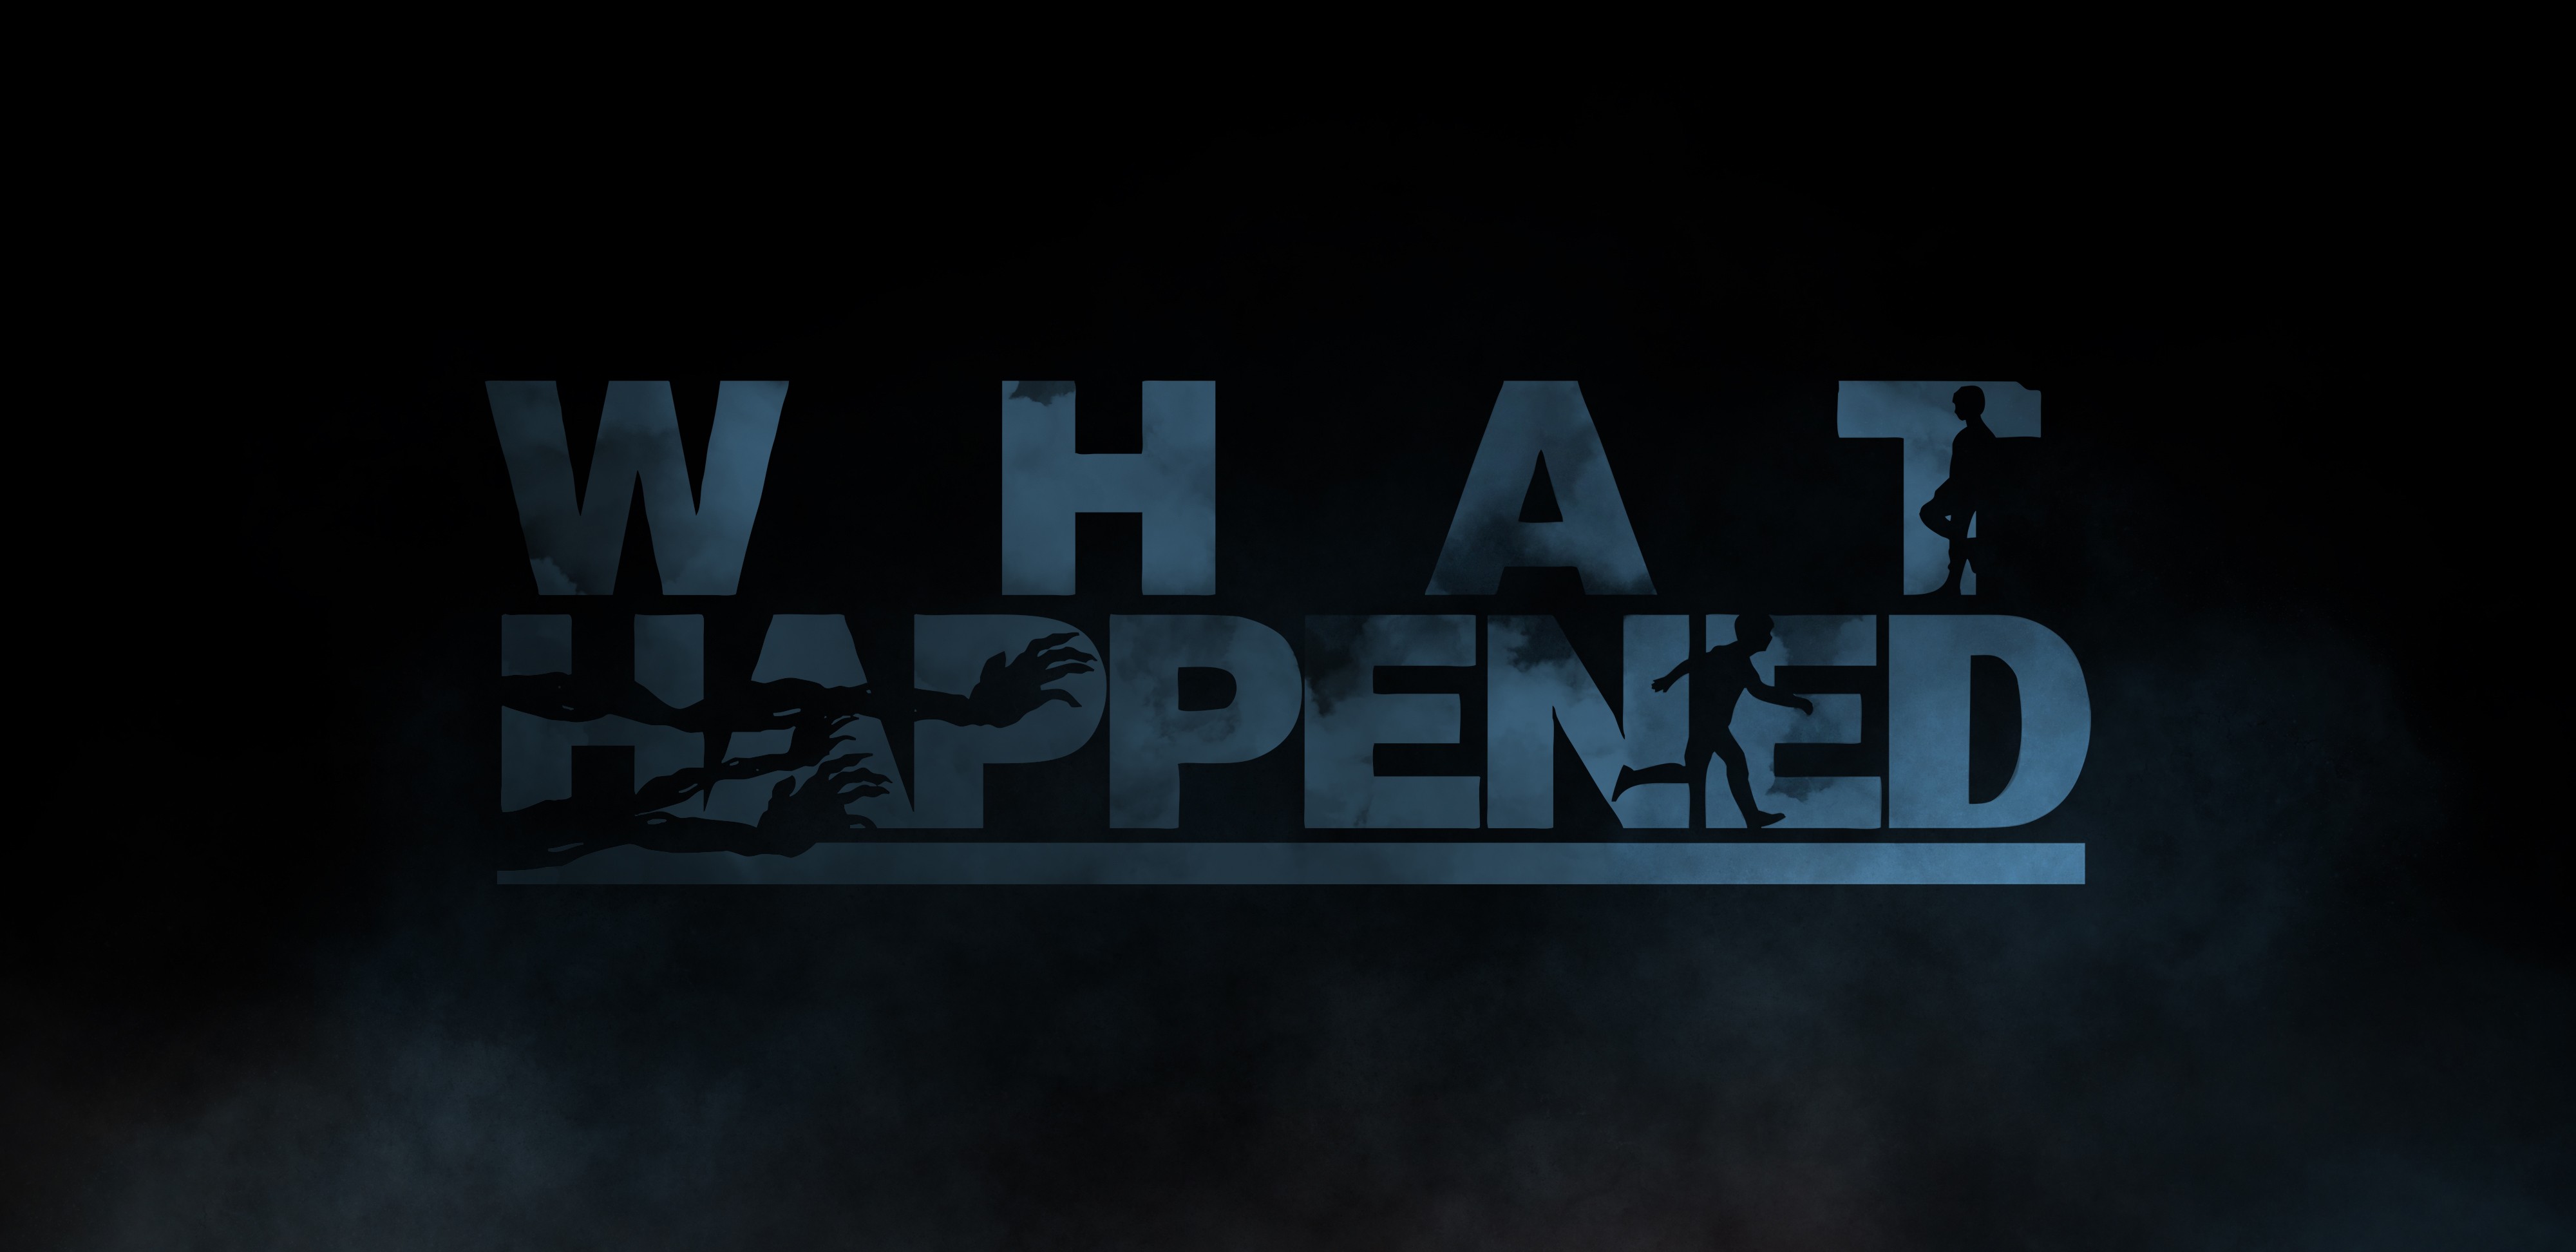 What happened first. What happened игра. What happened логотип. What happened игра картинки. What happened next игра.